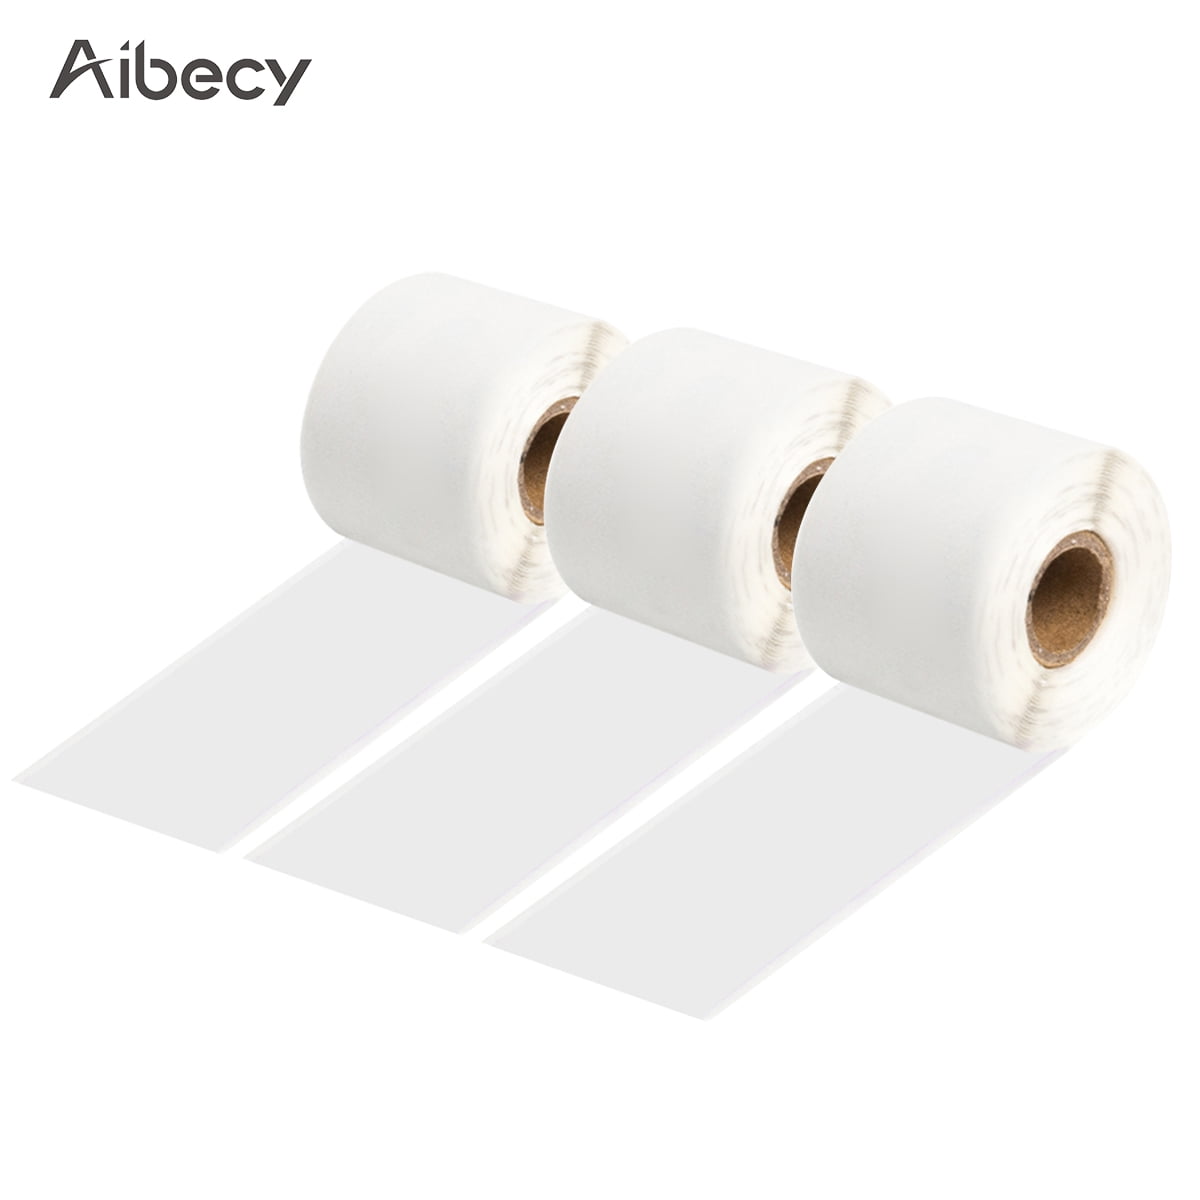 LARGE WHITE BLANK STICKY ADDRESS LABELS 110 X 65 VARIOUS SIZE PACKS 